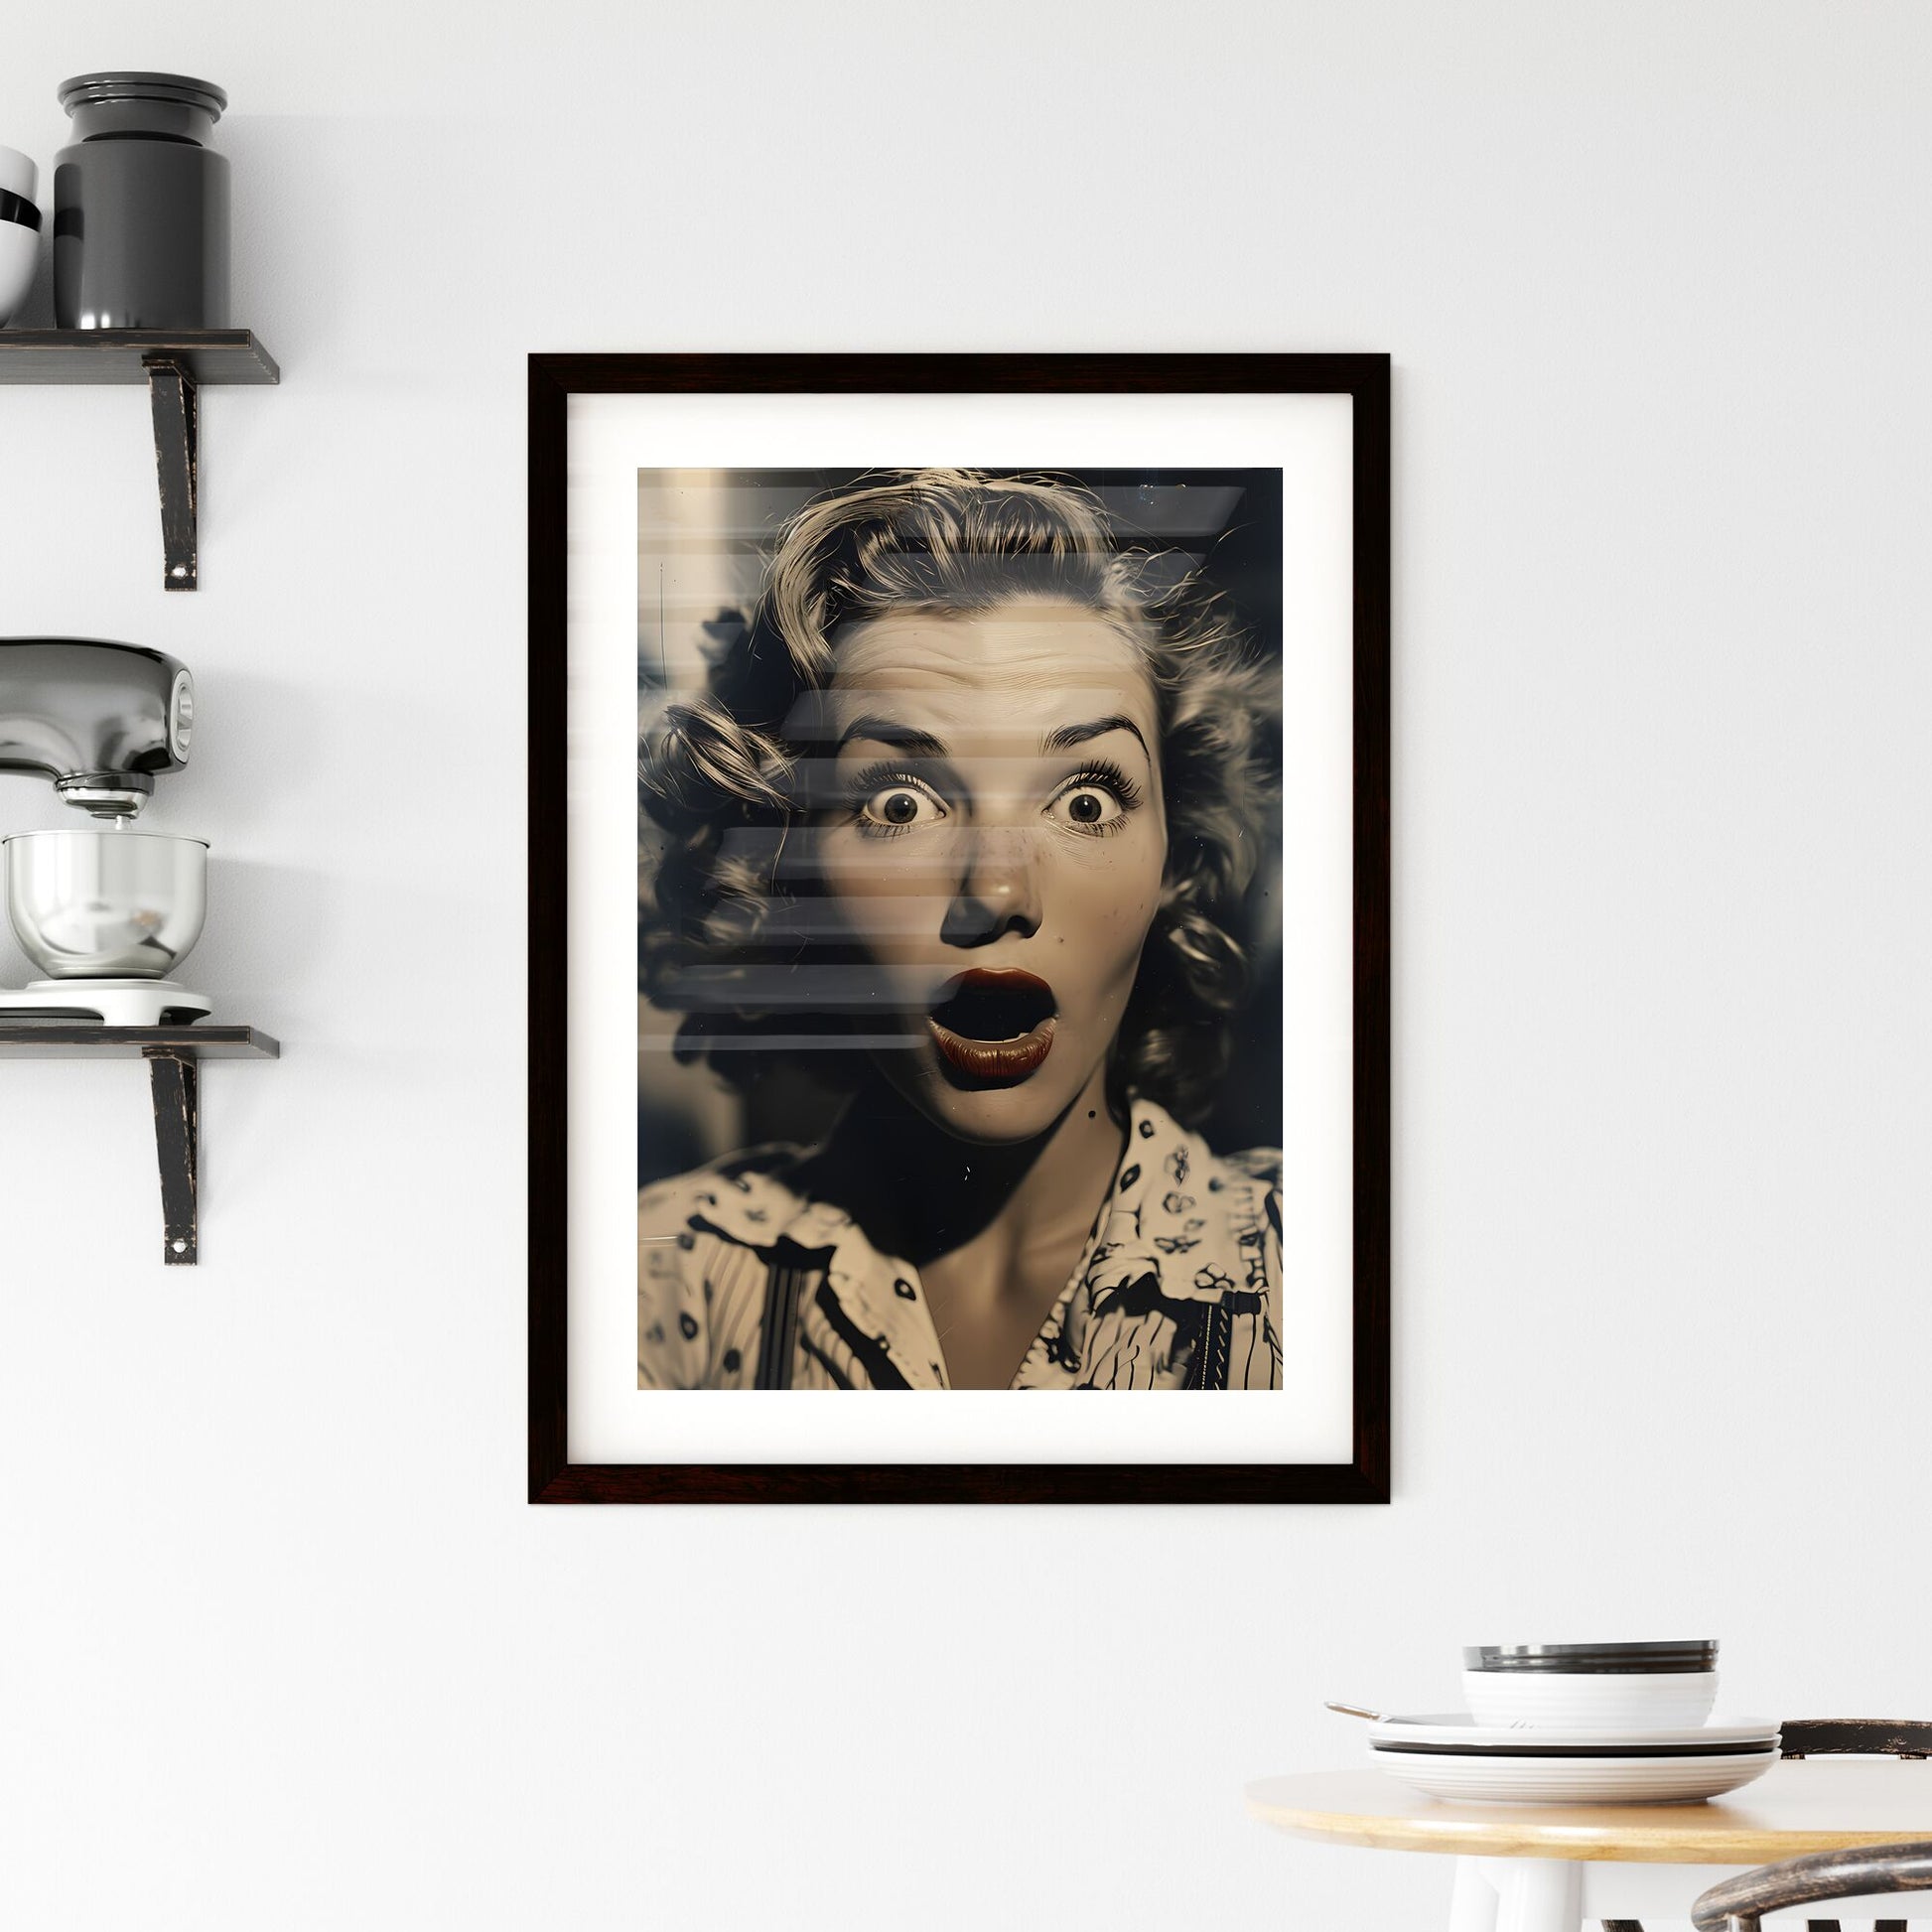 A Poster of shes making silly faces - A Woman With Her Mouth Open Default Title